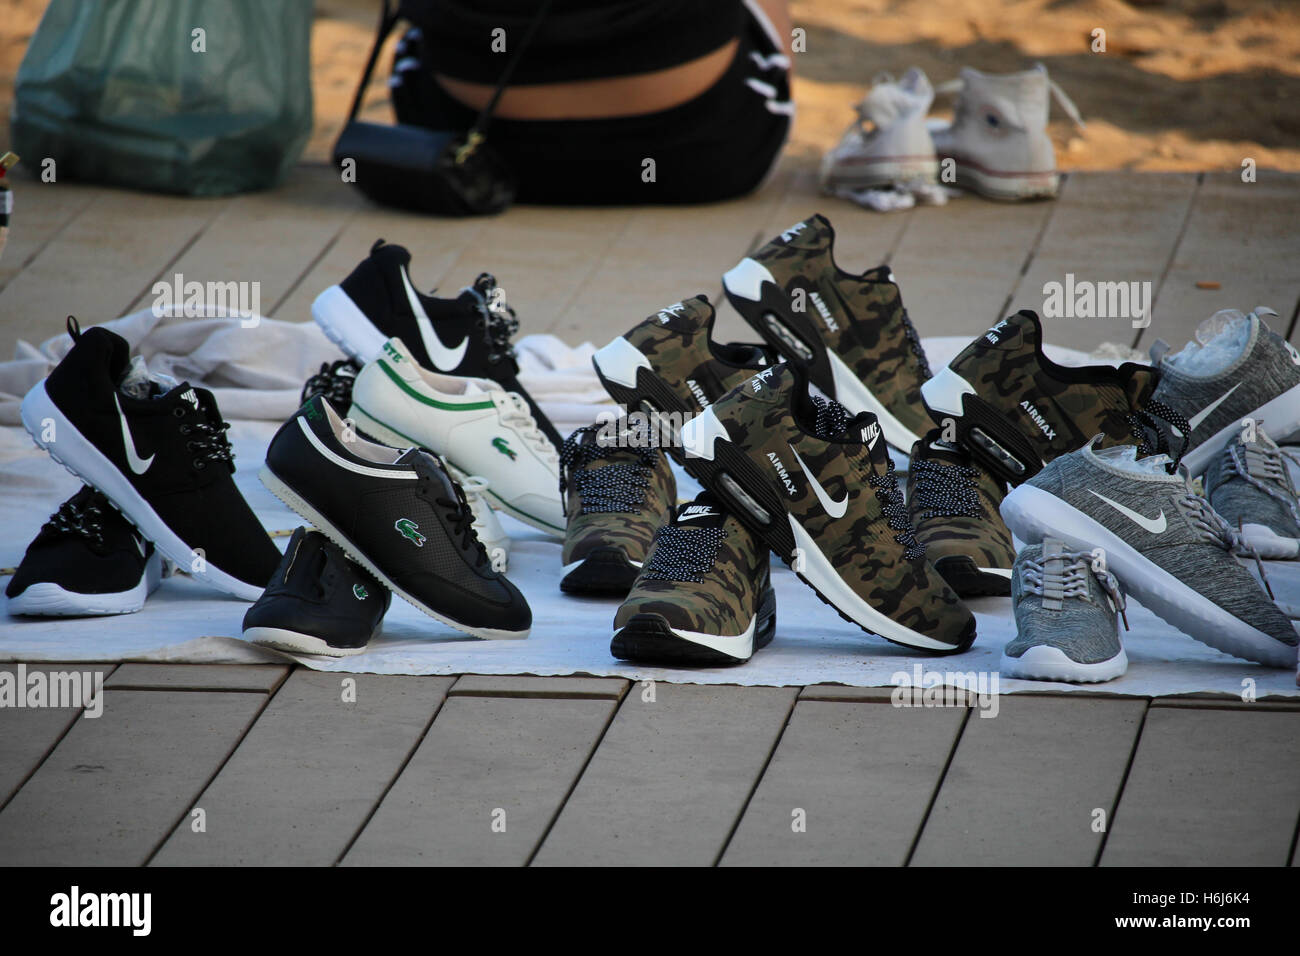 Barcelona, Spain - October 29, 2016: Copies of popular brands of shoes sold  on the Barceloneta beach. Although it is illegal, the phenomenon called  "top manta" is extended in central Barcelona, with